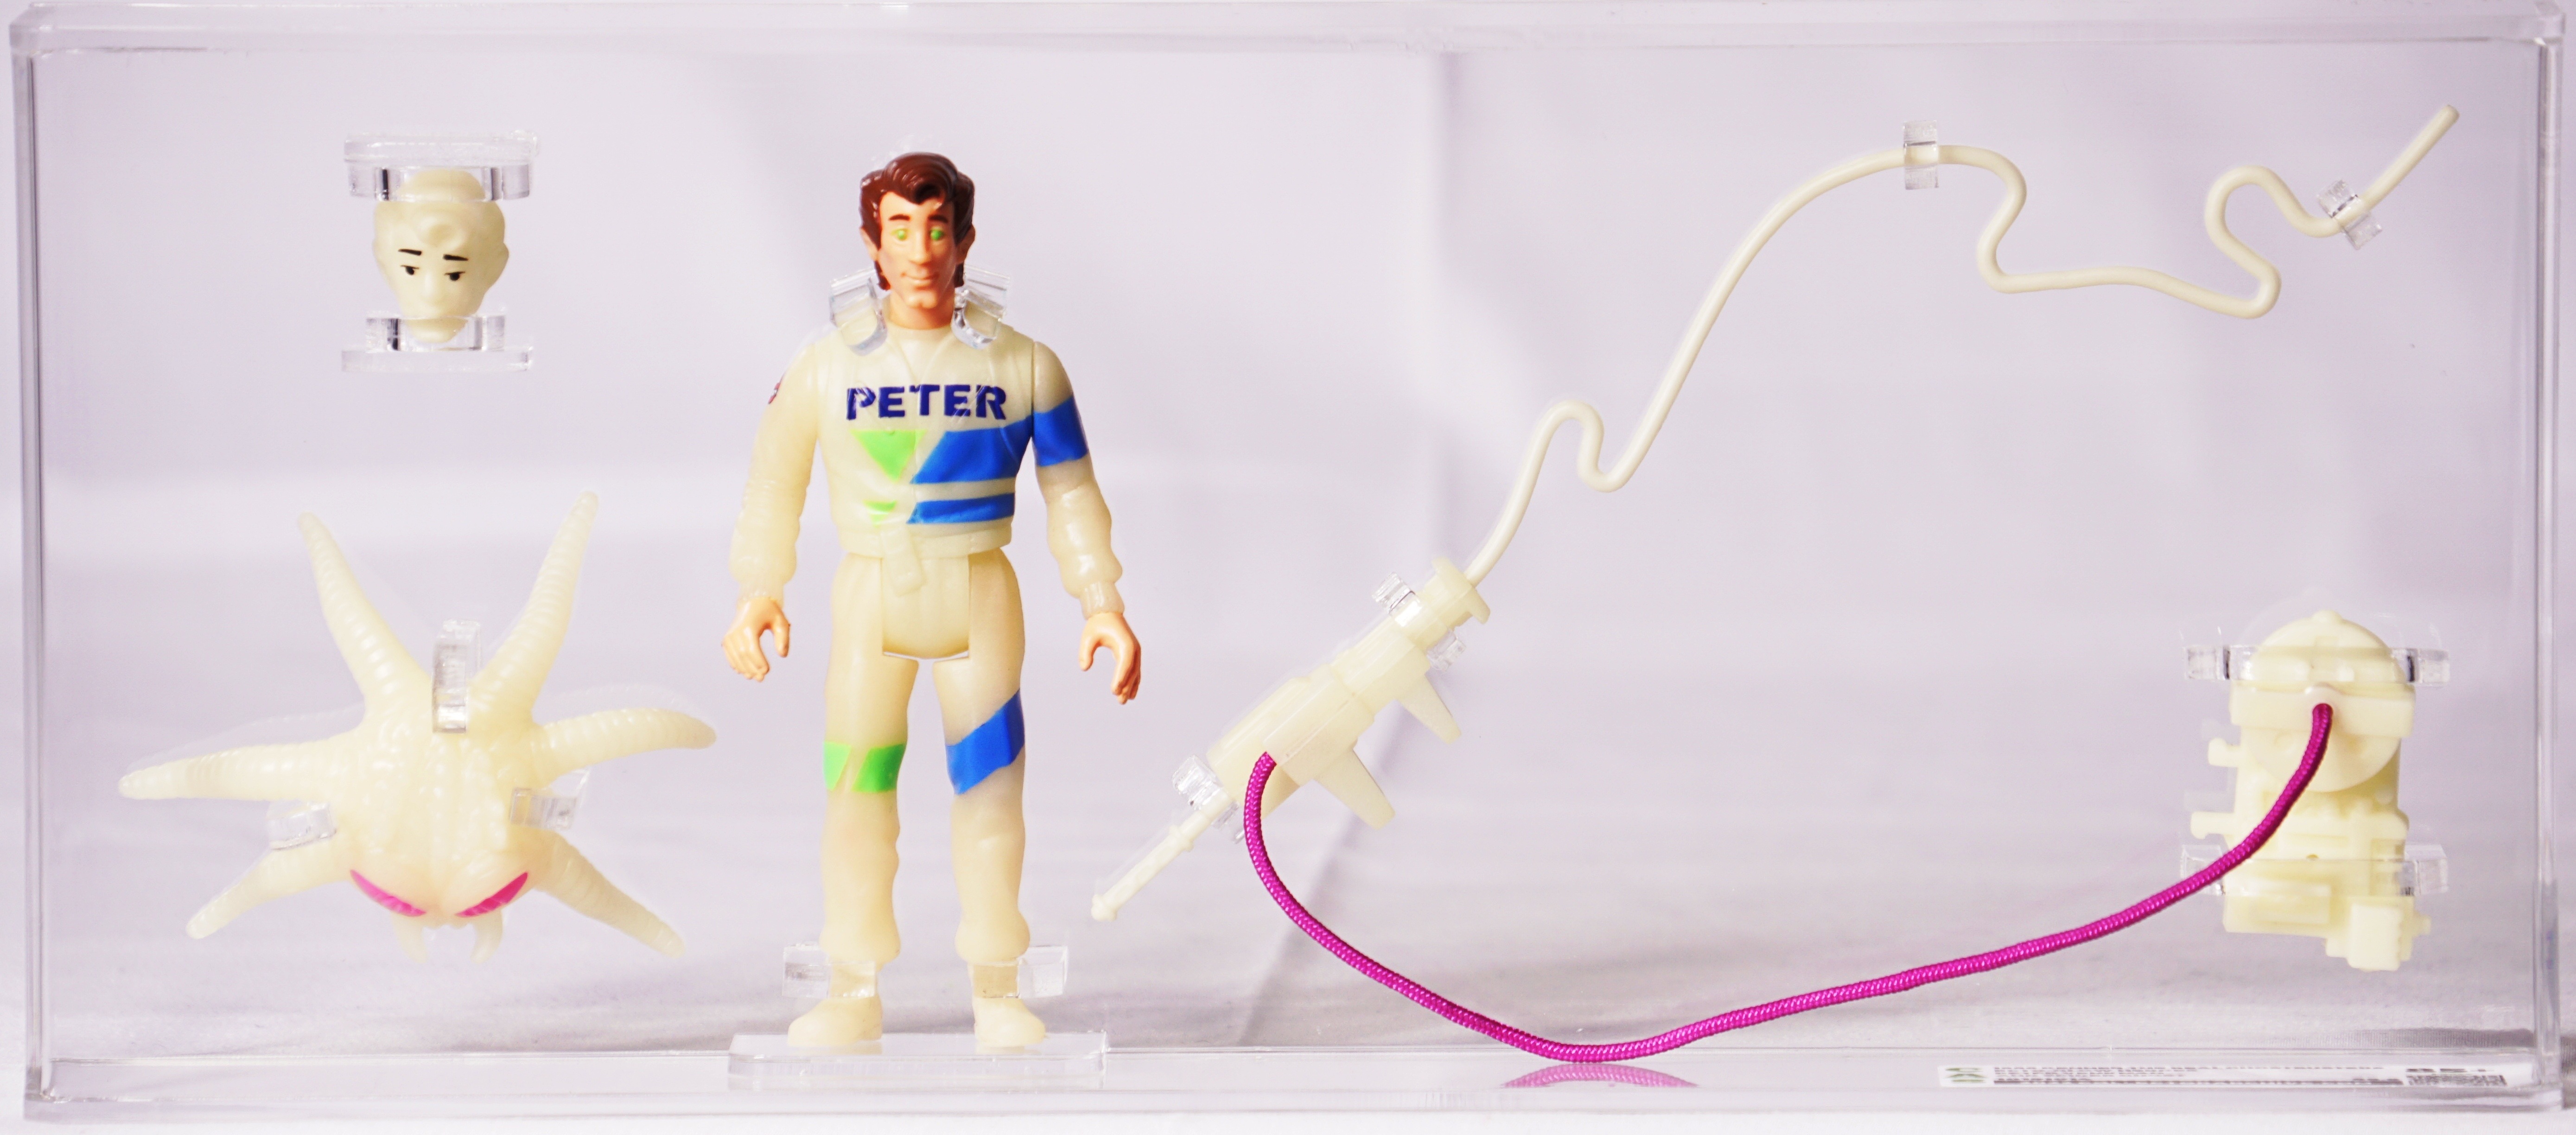 1991 Kenner The Real Ghostbusters Loose Action Figure - Ecto-Glow Heroes  Peter Venkman